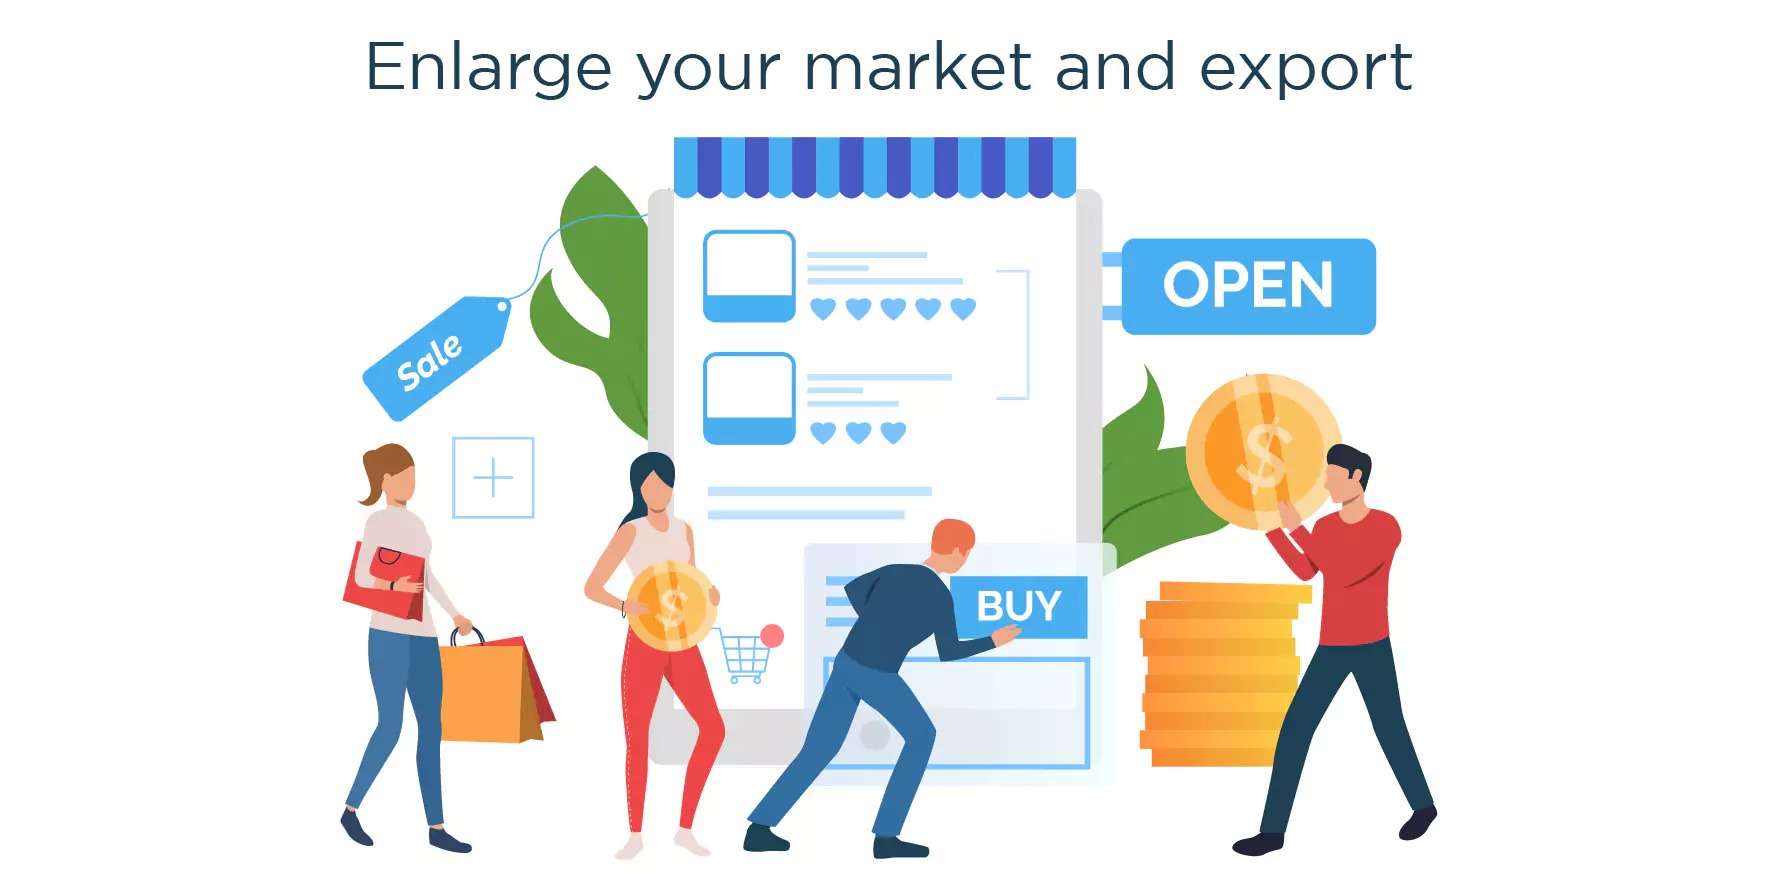 Enlarge your market and export